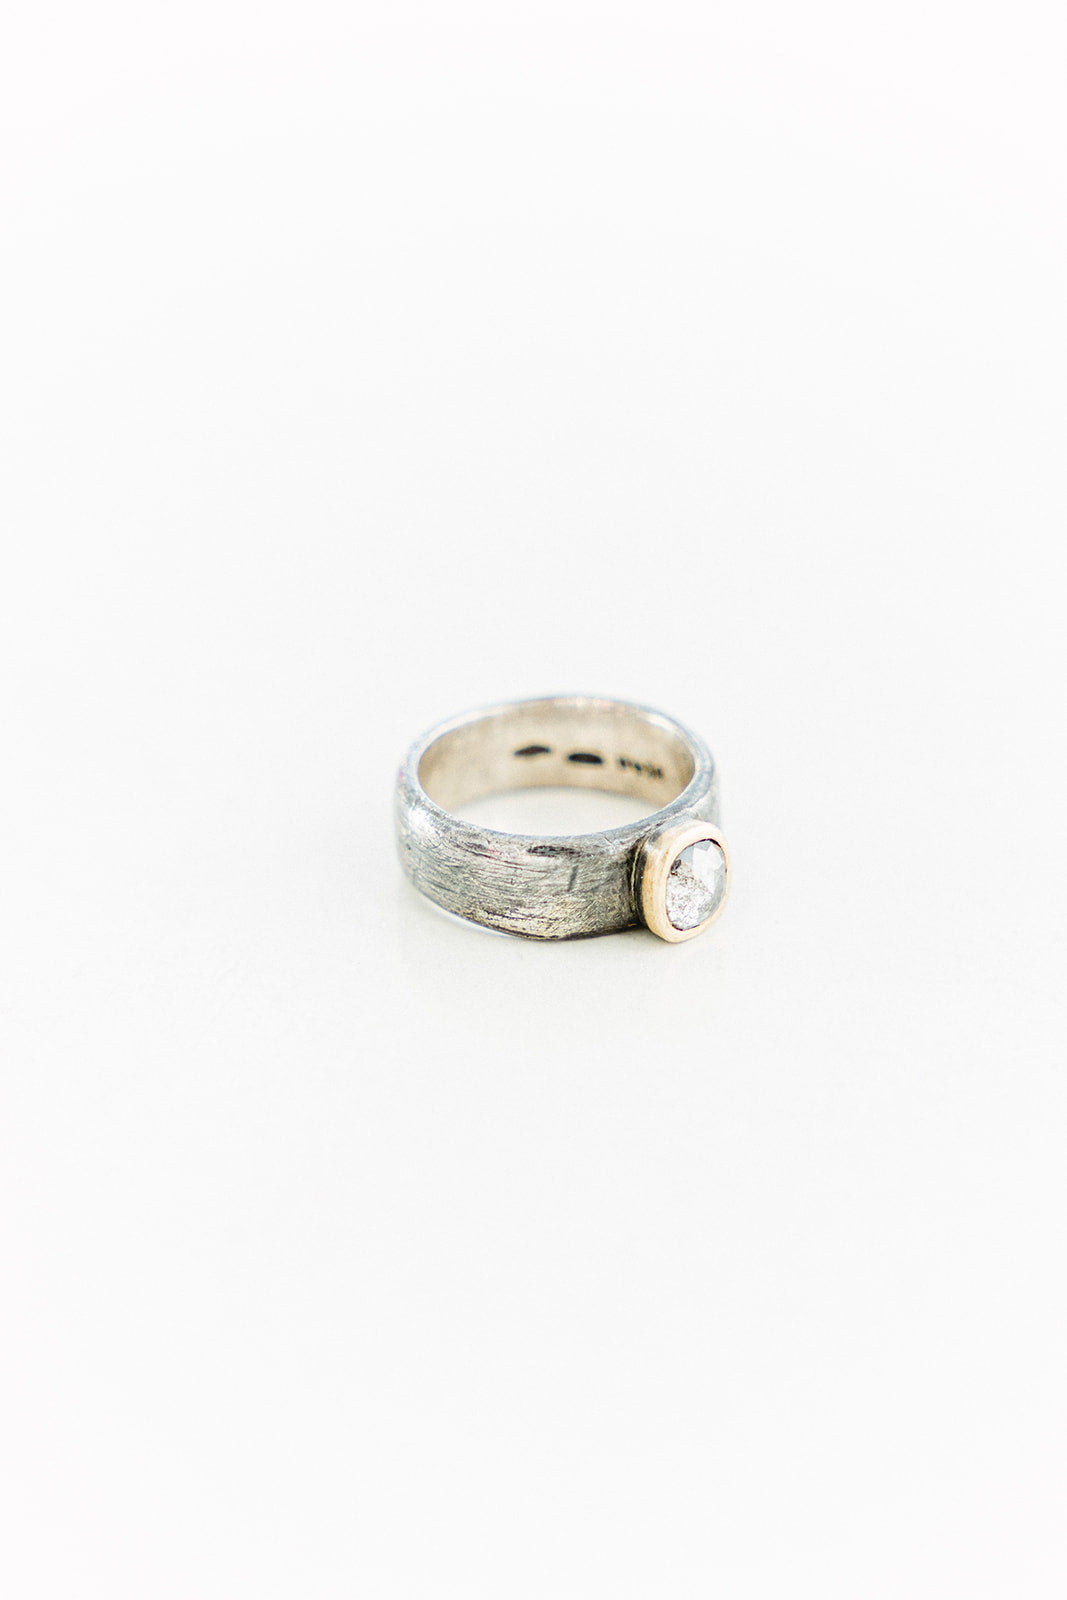 Salt and Pepper Solitaire Sterling Silver and 18K Yellow Gold Ring